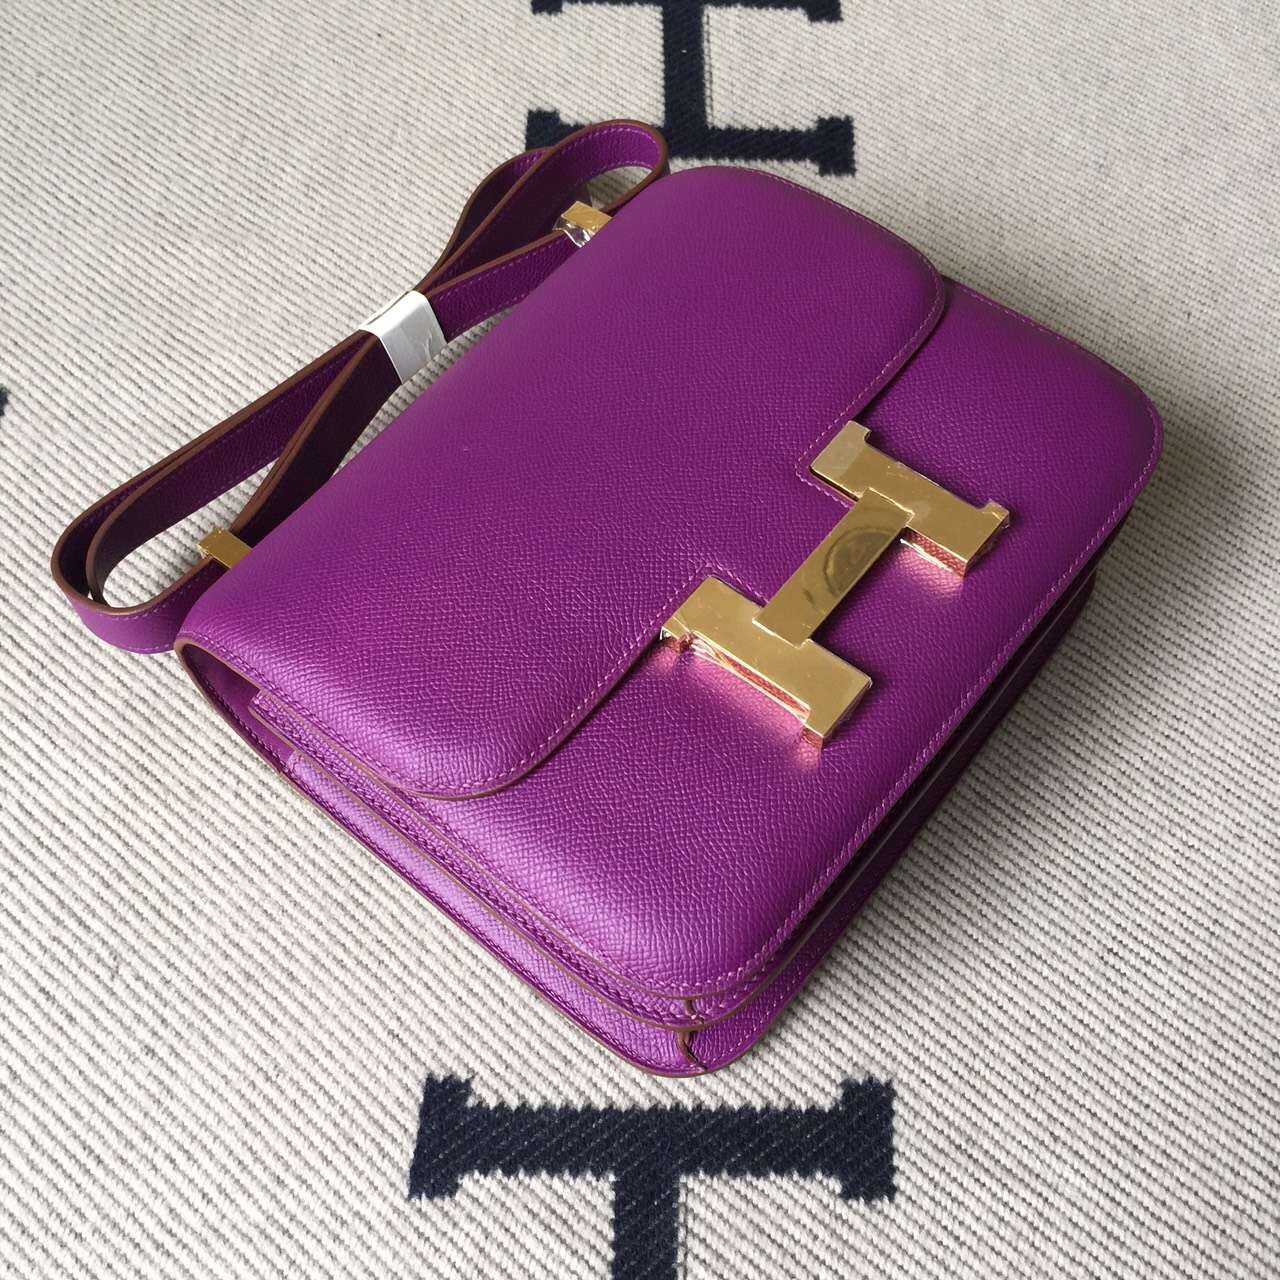 New Fashion Hermes Epsom Leather Constance Bag in P9 Anemone Purple